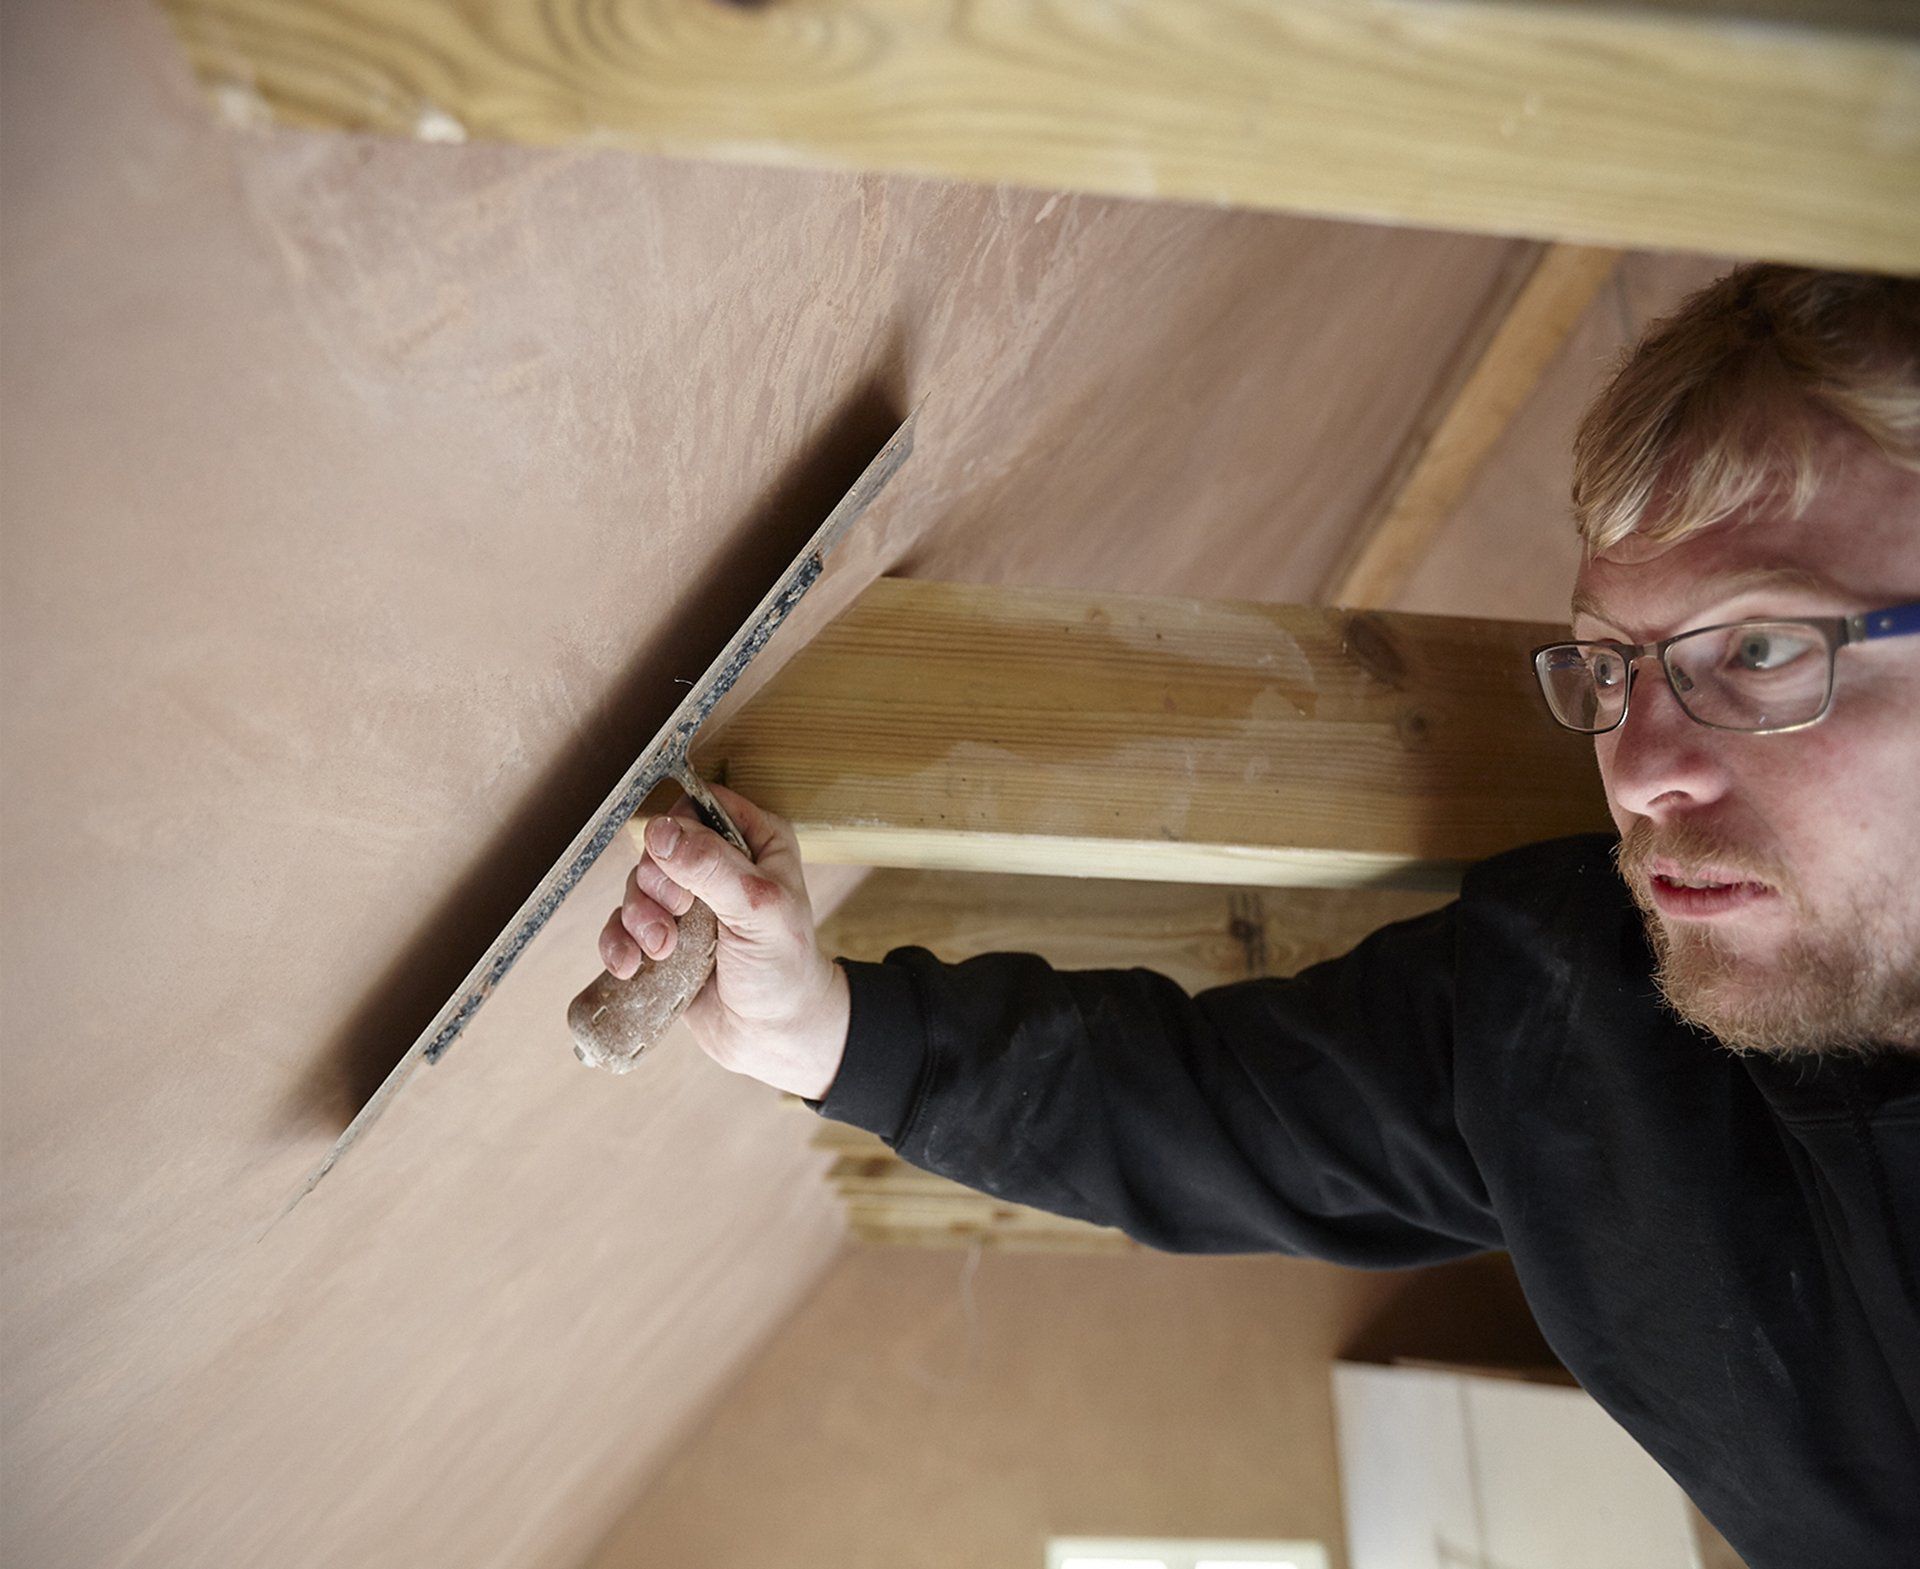 A man wearing glasses is using a trowel to plaster a wall